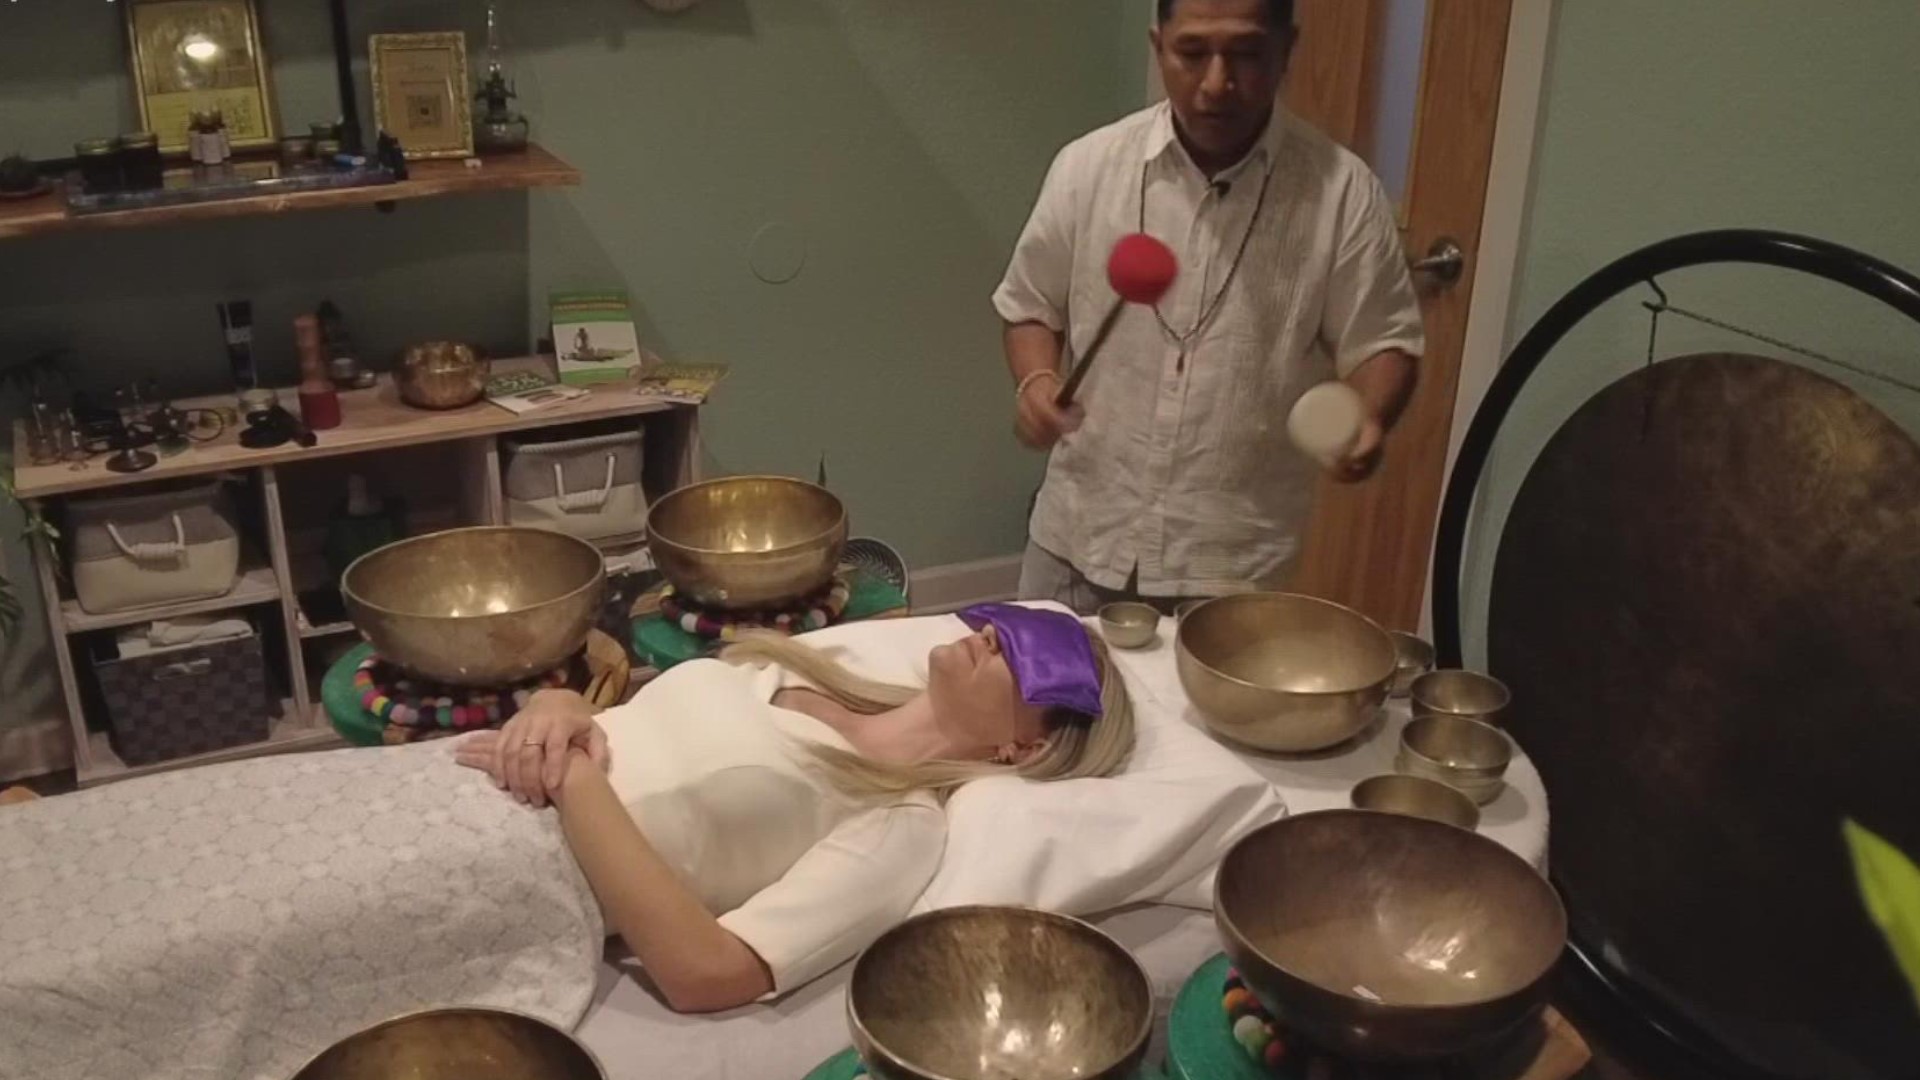 Sound Therapy has been used for centuries in Traditional Chinese Medicine for everything from headaches, Parkinson's, anxiety and depression.